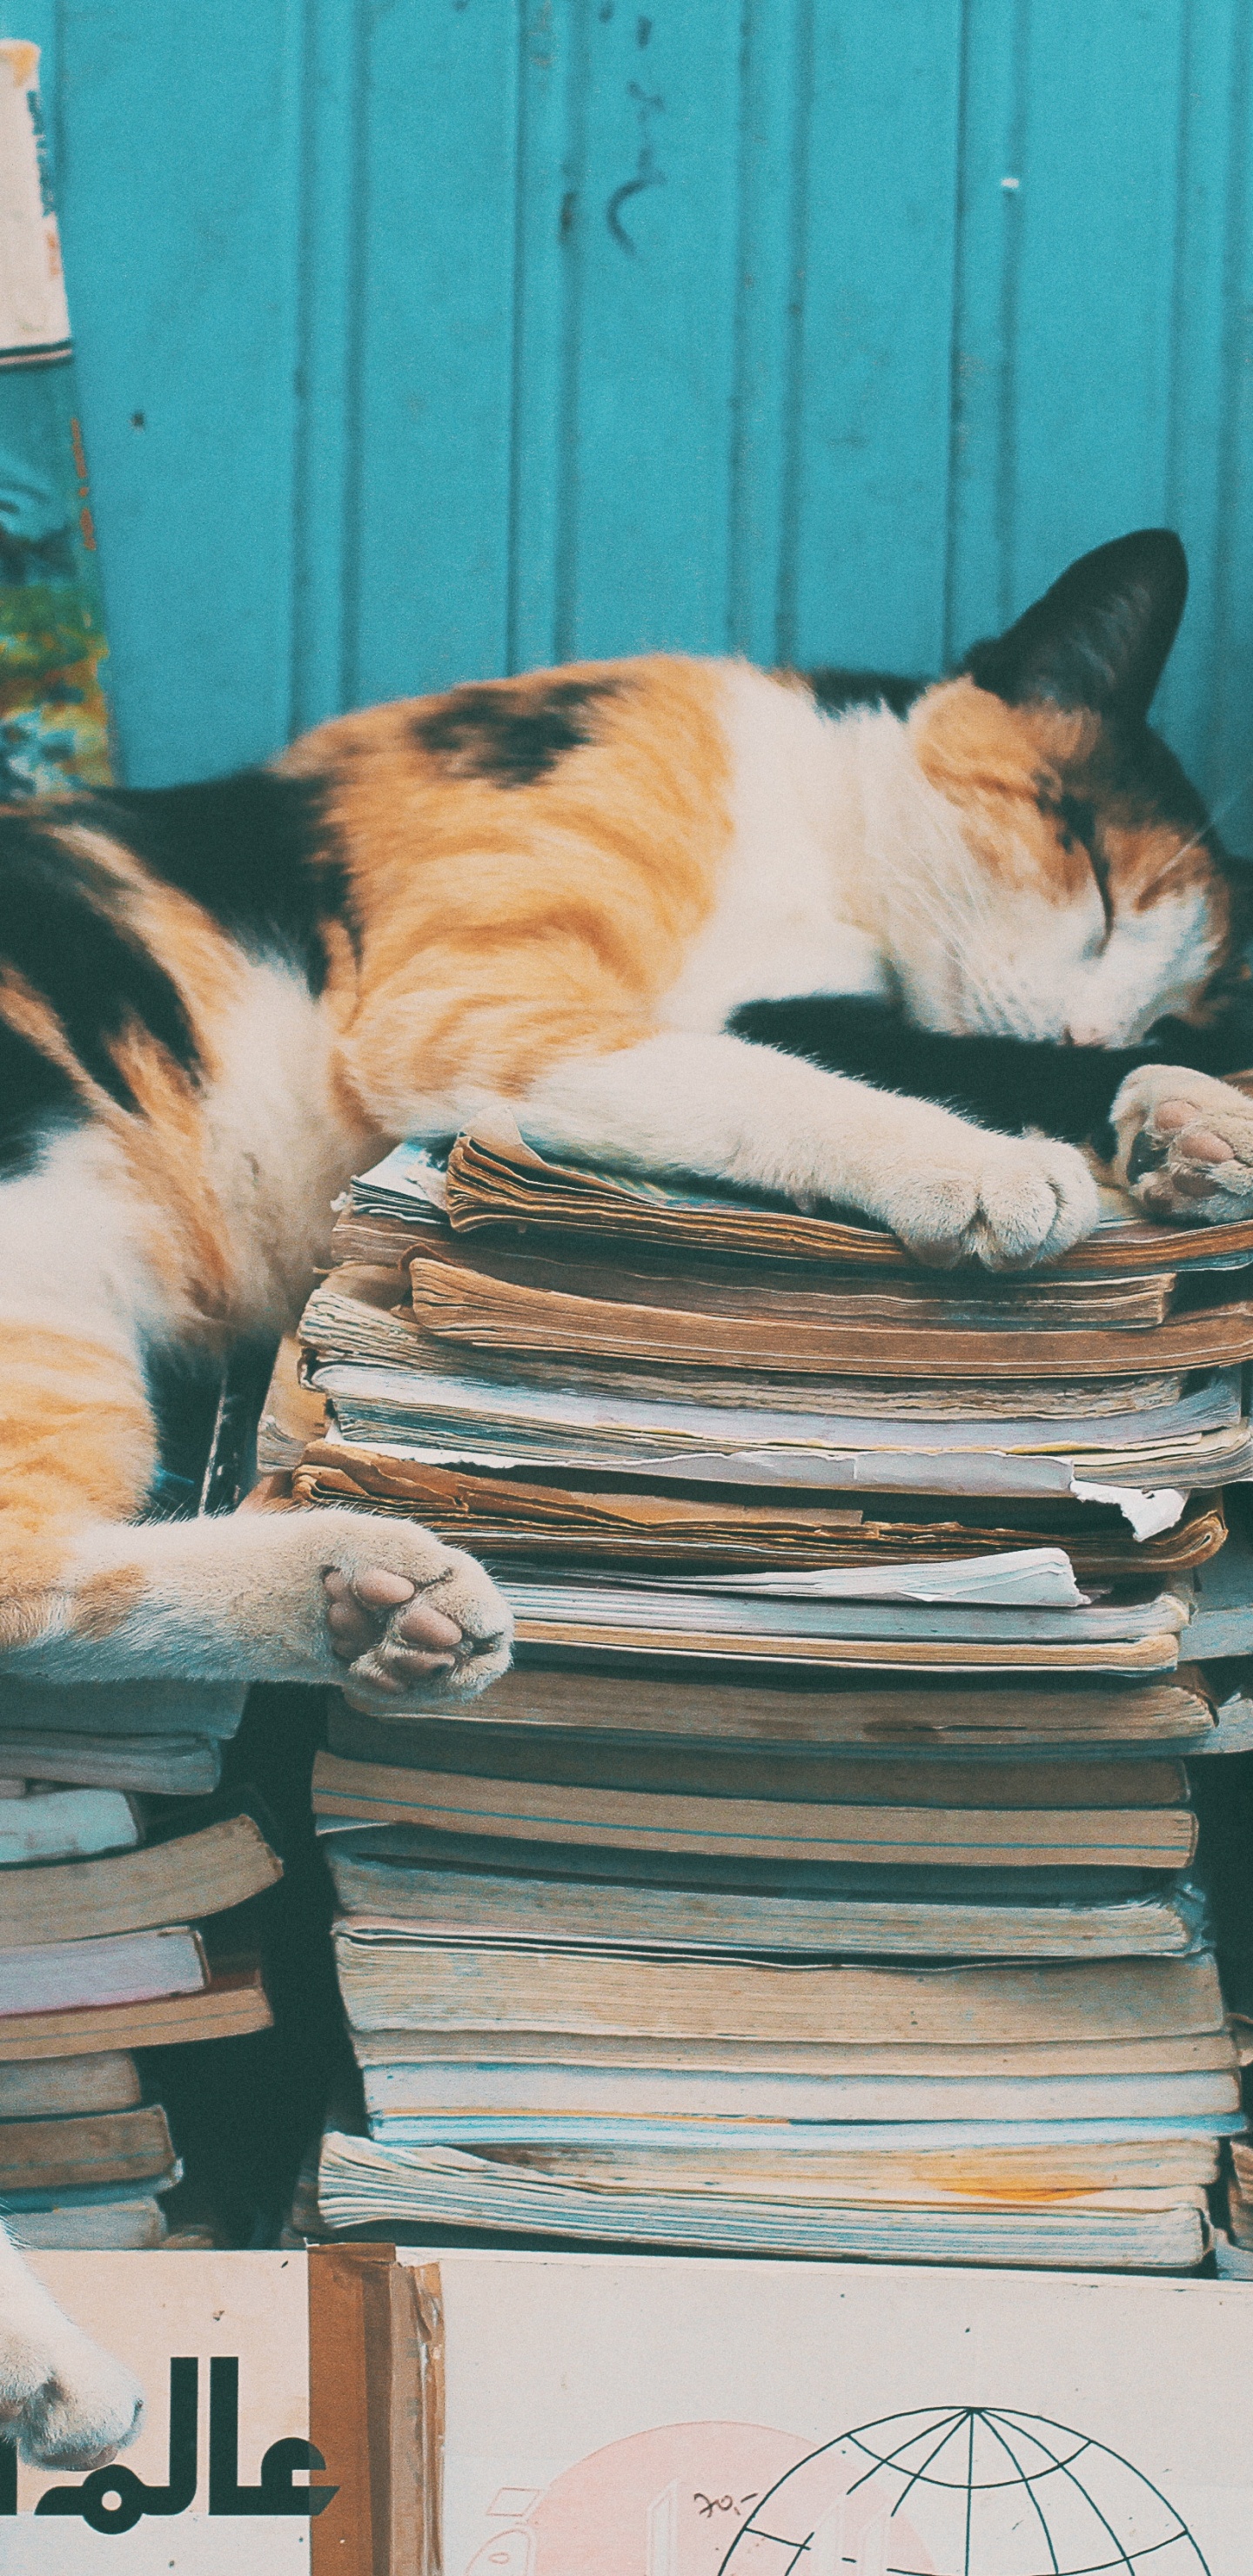 Calico Cat on Books on Table. Wallpaper in 1440x2960 Resolution